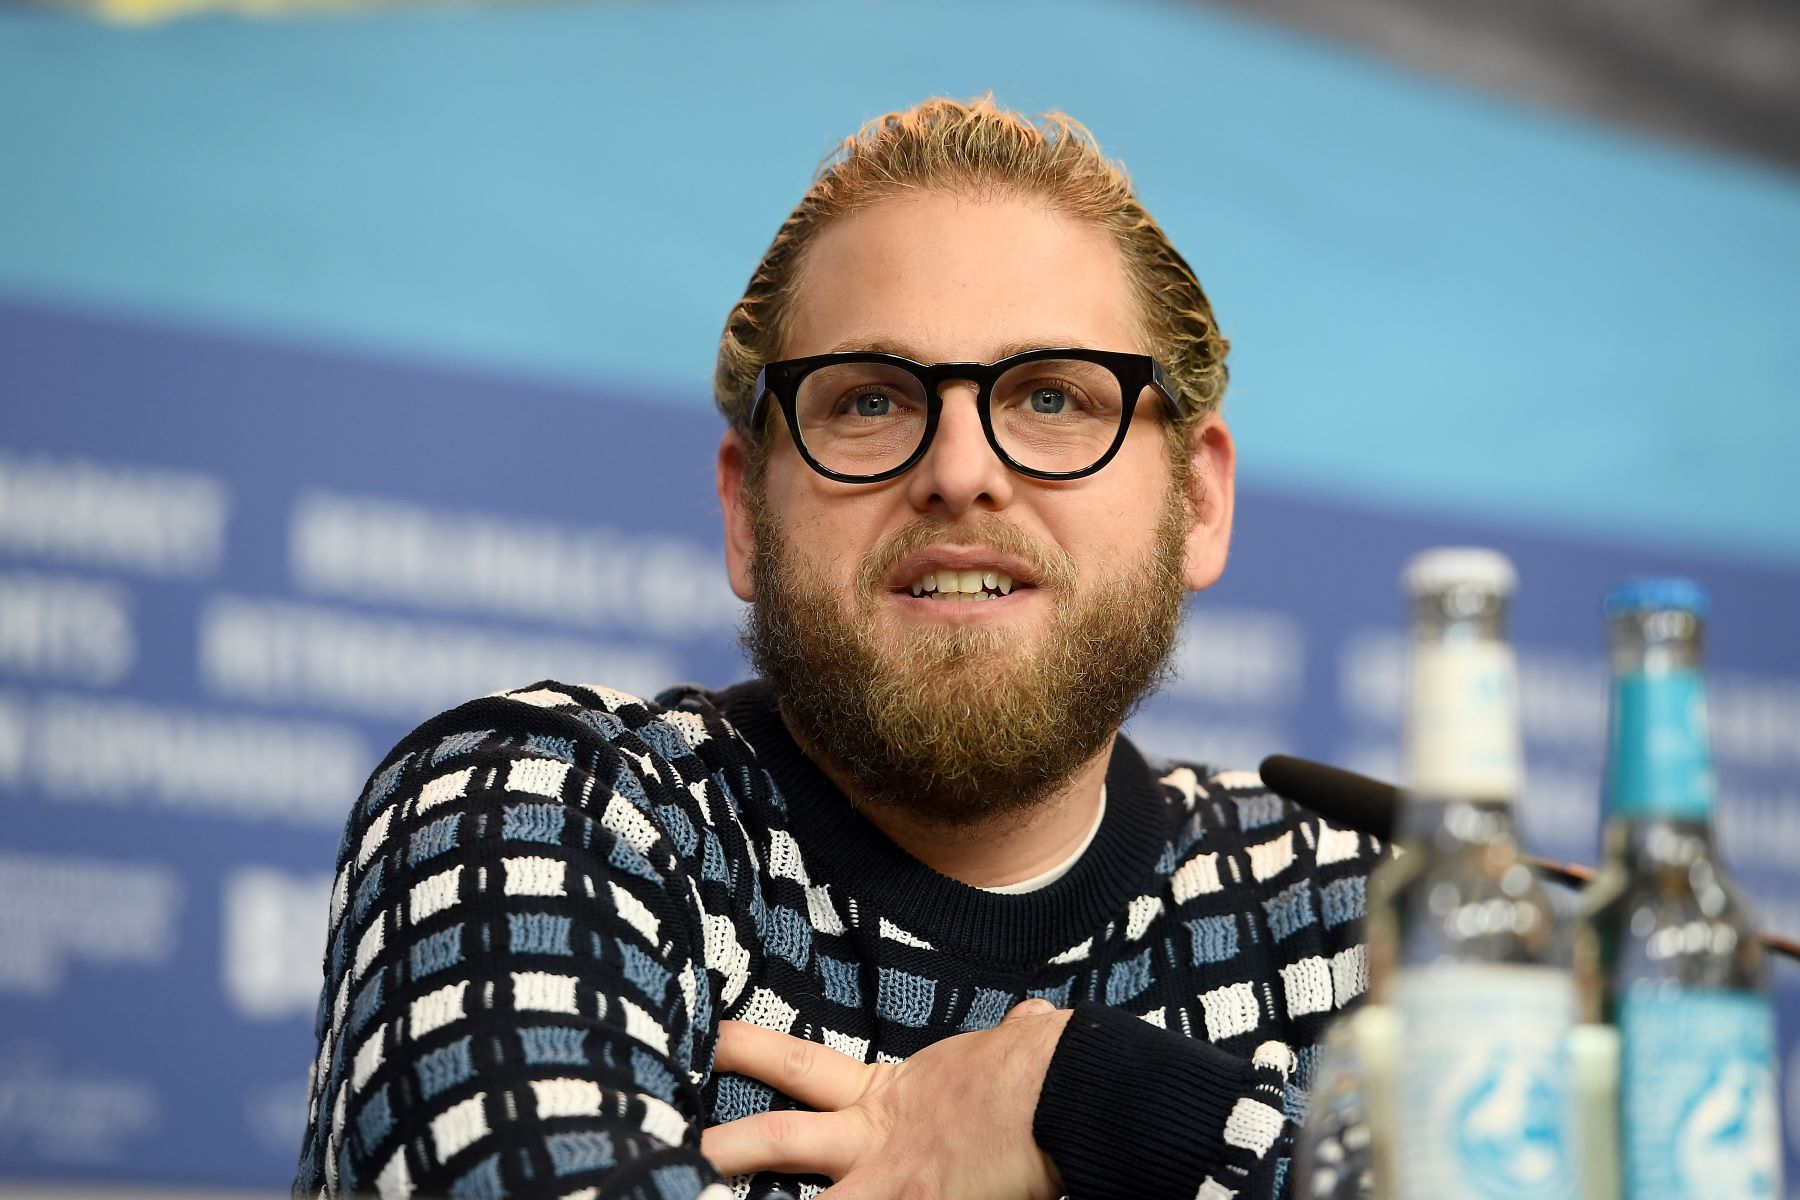 Leonardo DiCaprio, Jennifer Aniston, and Meryl Streep All Got ‘Hooked’ on a Healthy Energy Drink Because of Jonah Hill’s Obsession